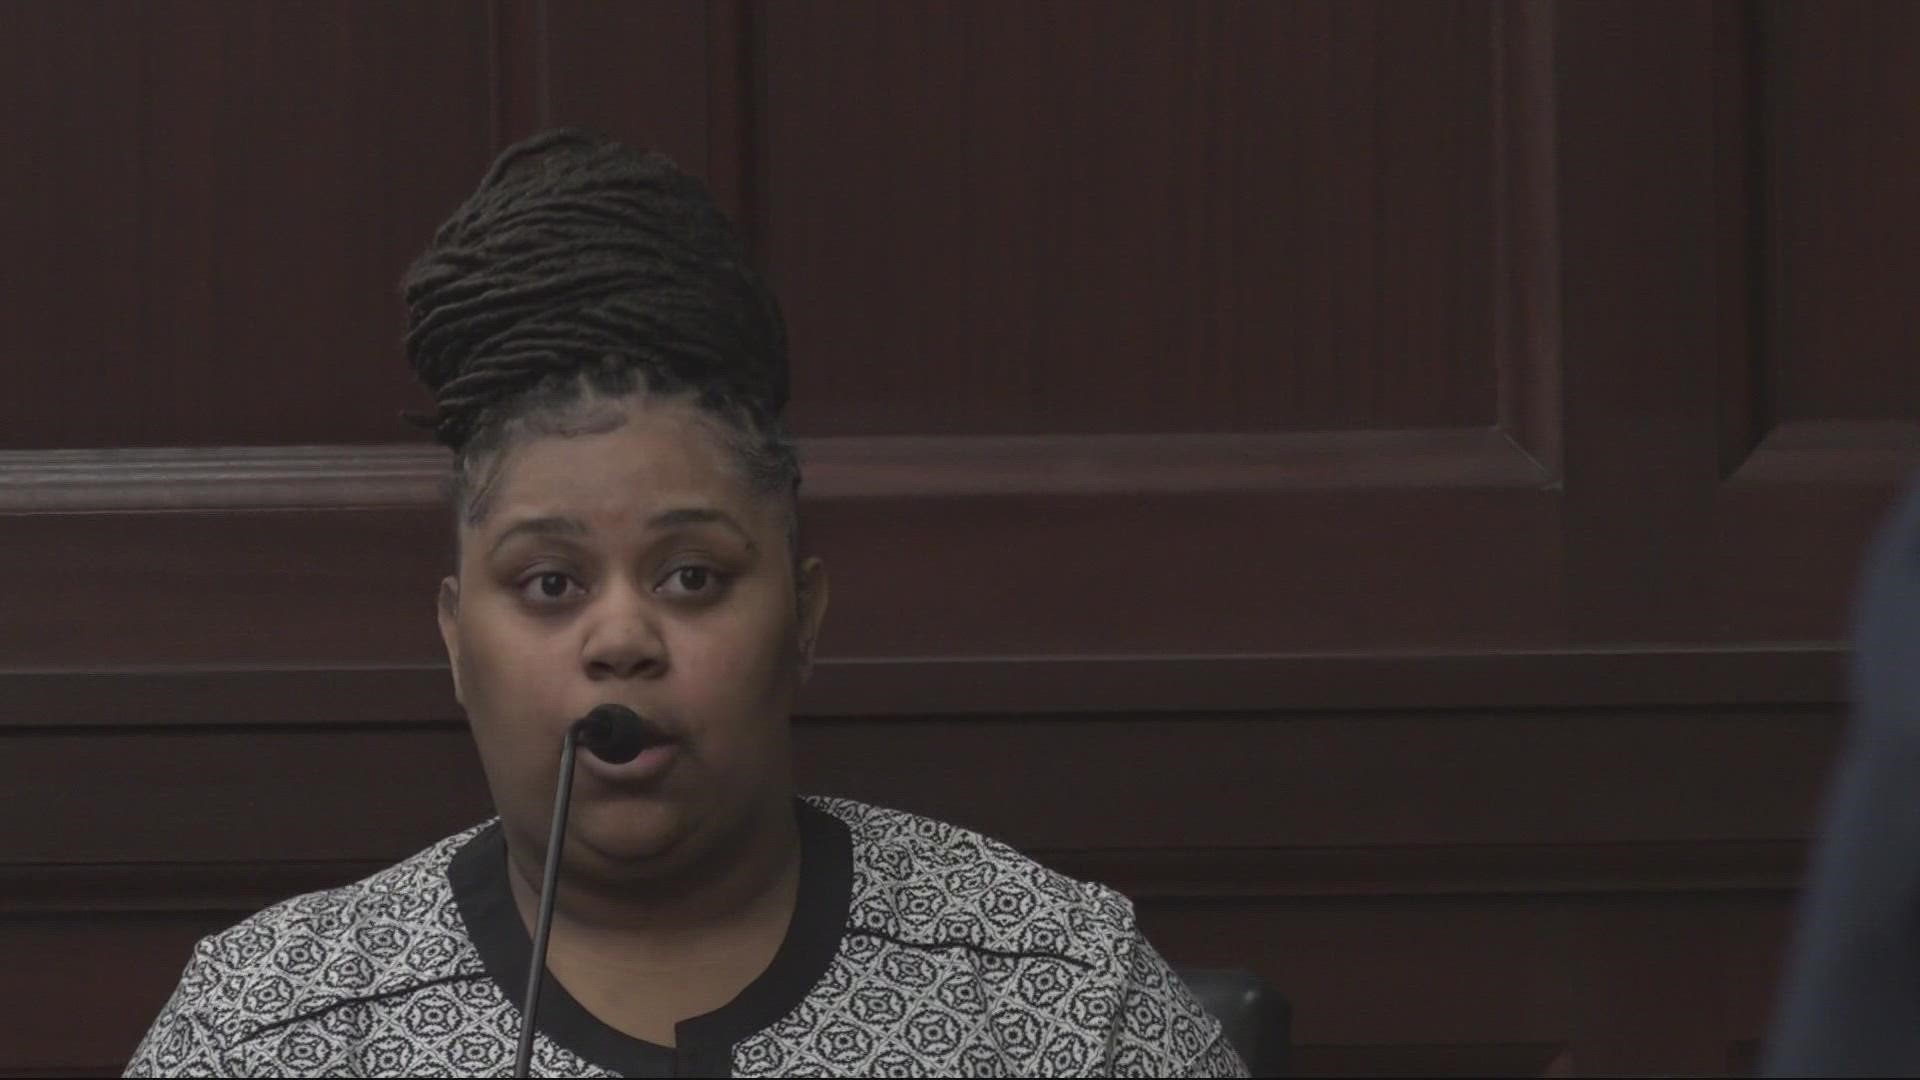 A judge has declared a mistrial for Sheatavia Cooper, accused of killing a teenager at a Wawa in 2020. The jury cannot agree if she is guilty.